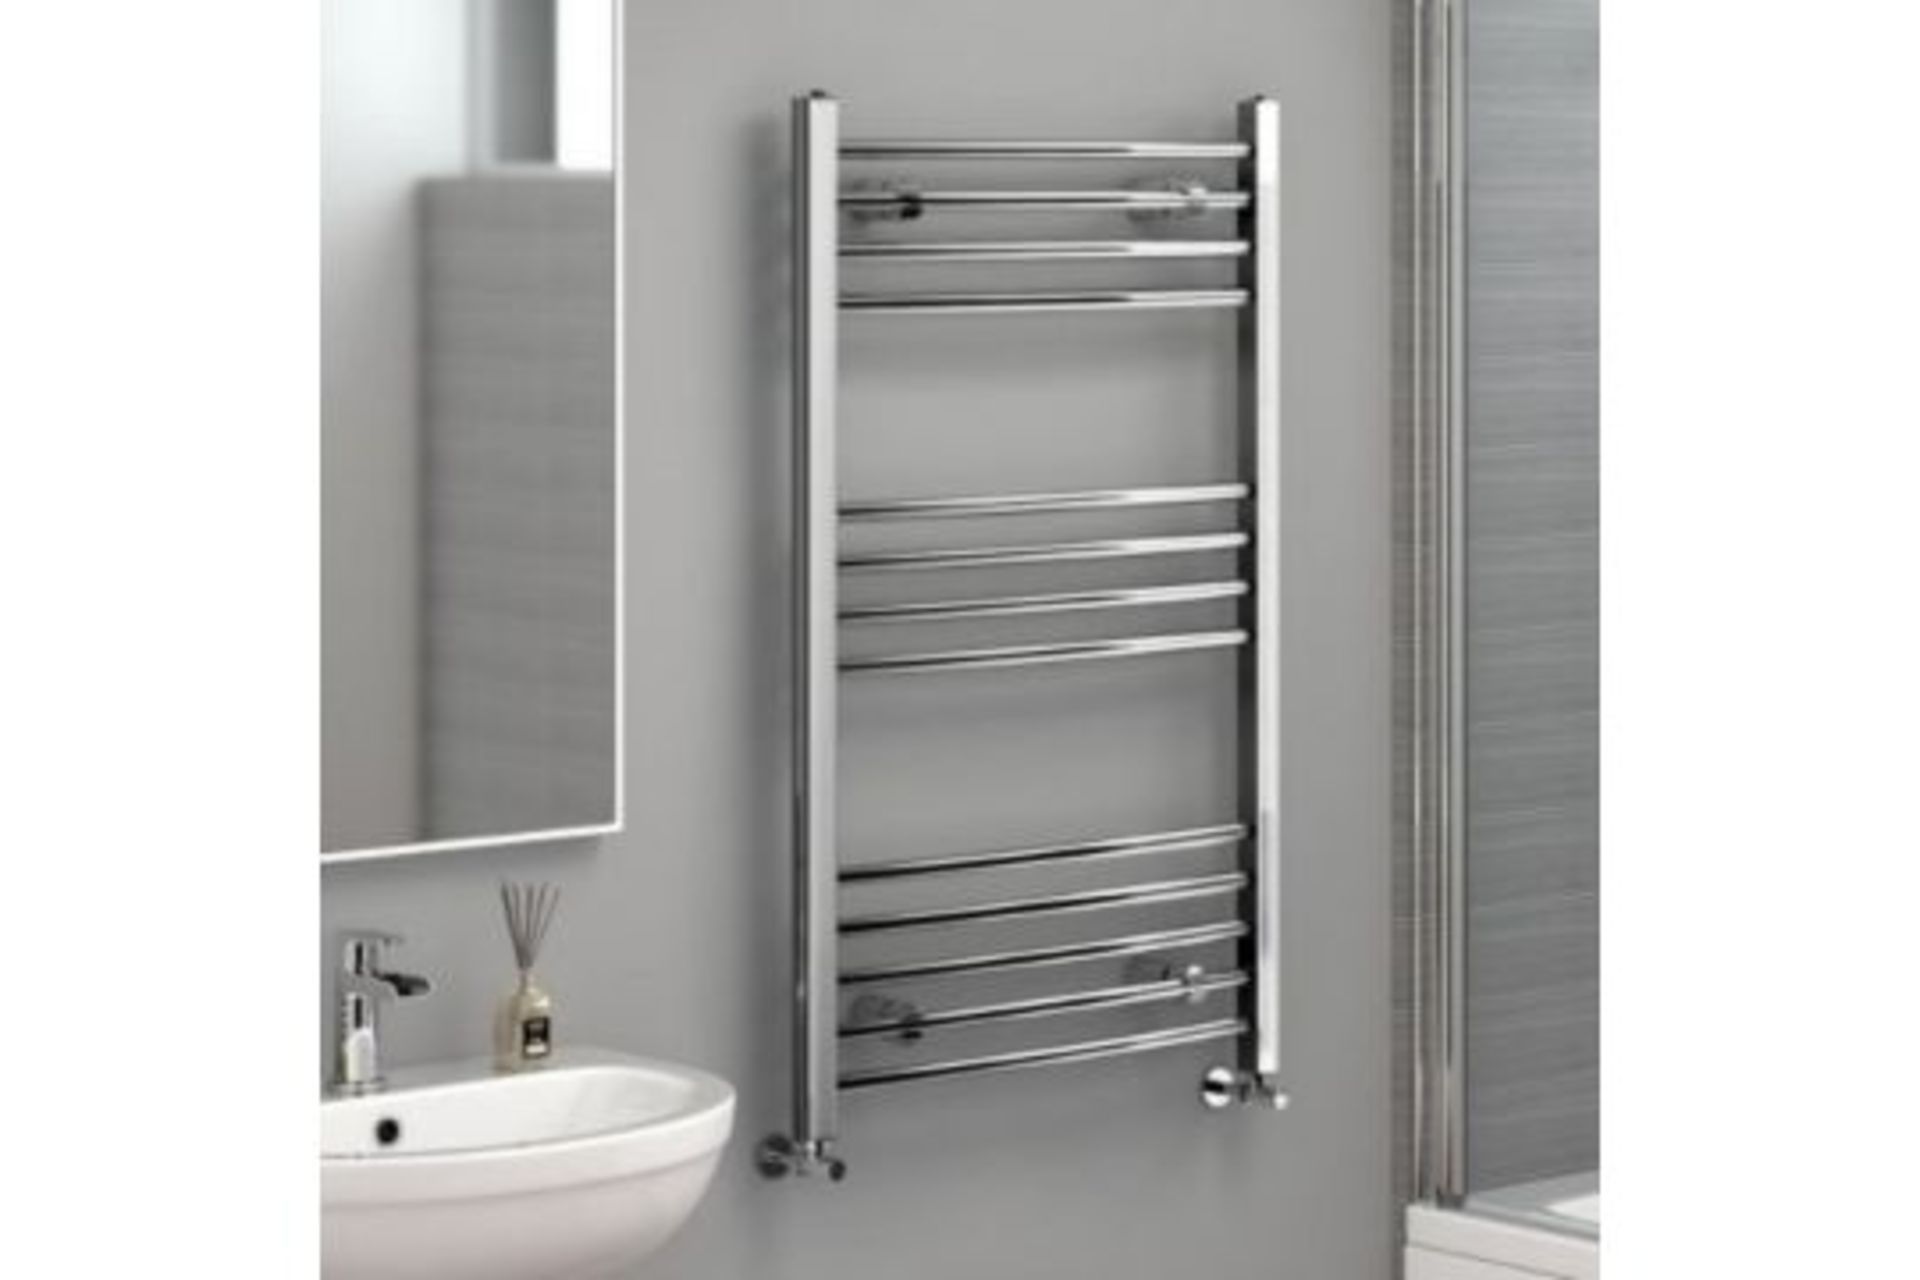 BRAND NEW BOXED 1200x500mm - 20mm Tubes - RRP £219.99.Chrome Curved Rail Ladder Towel Radiator.